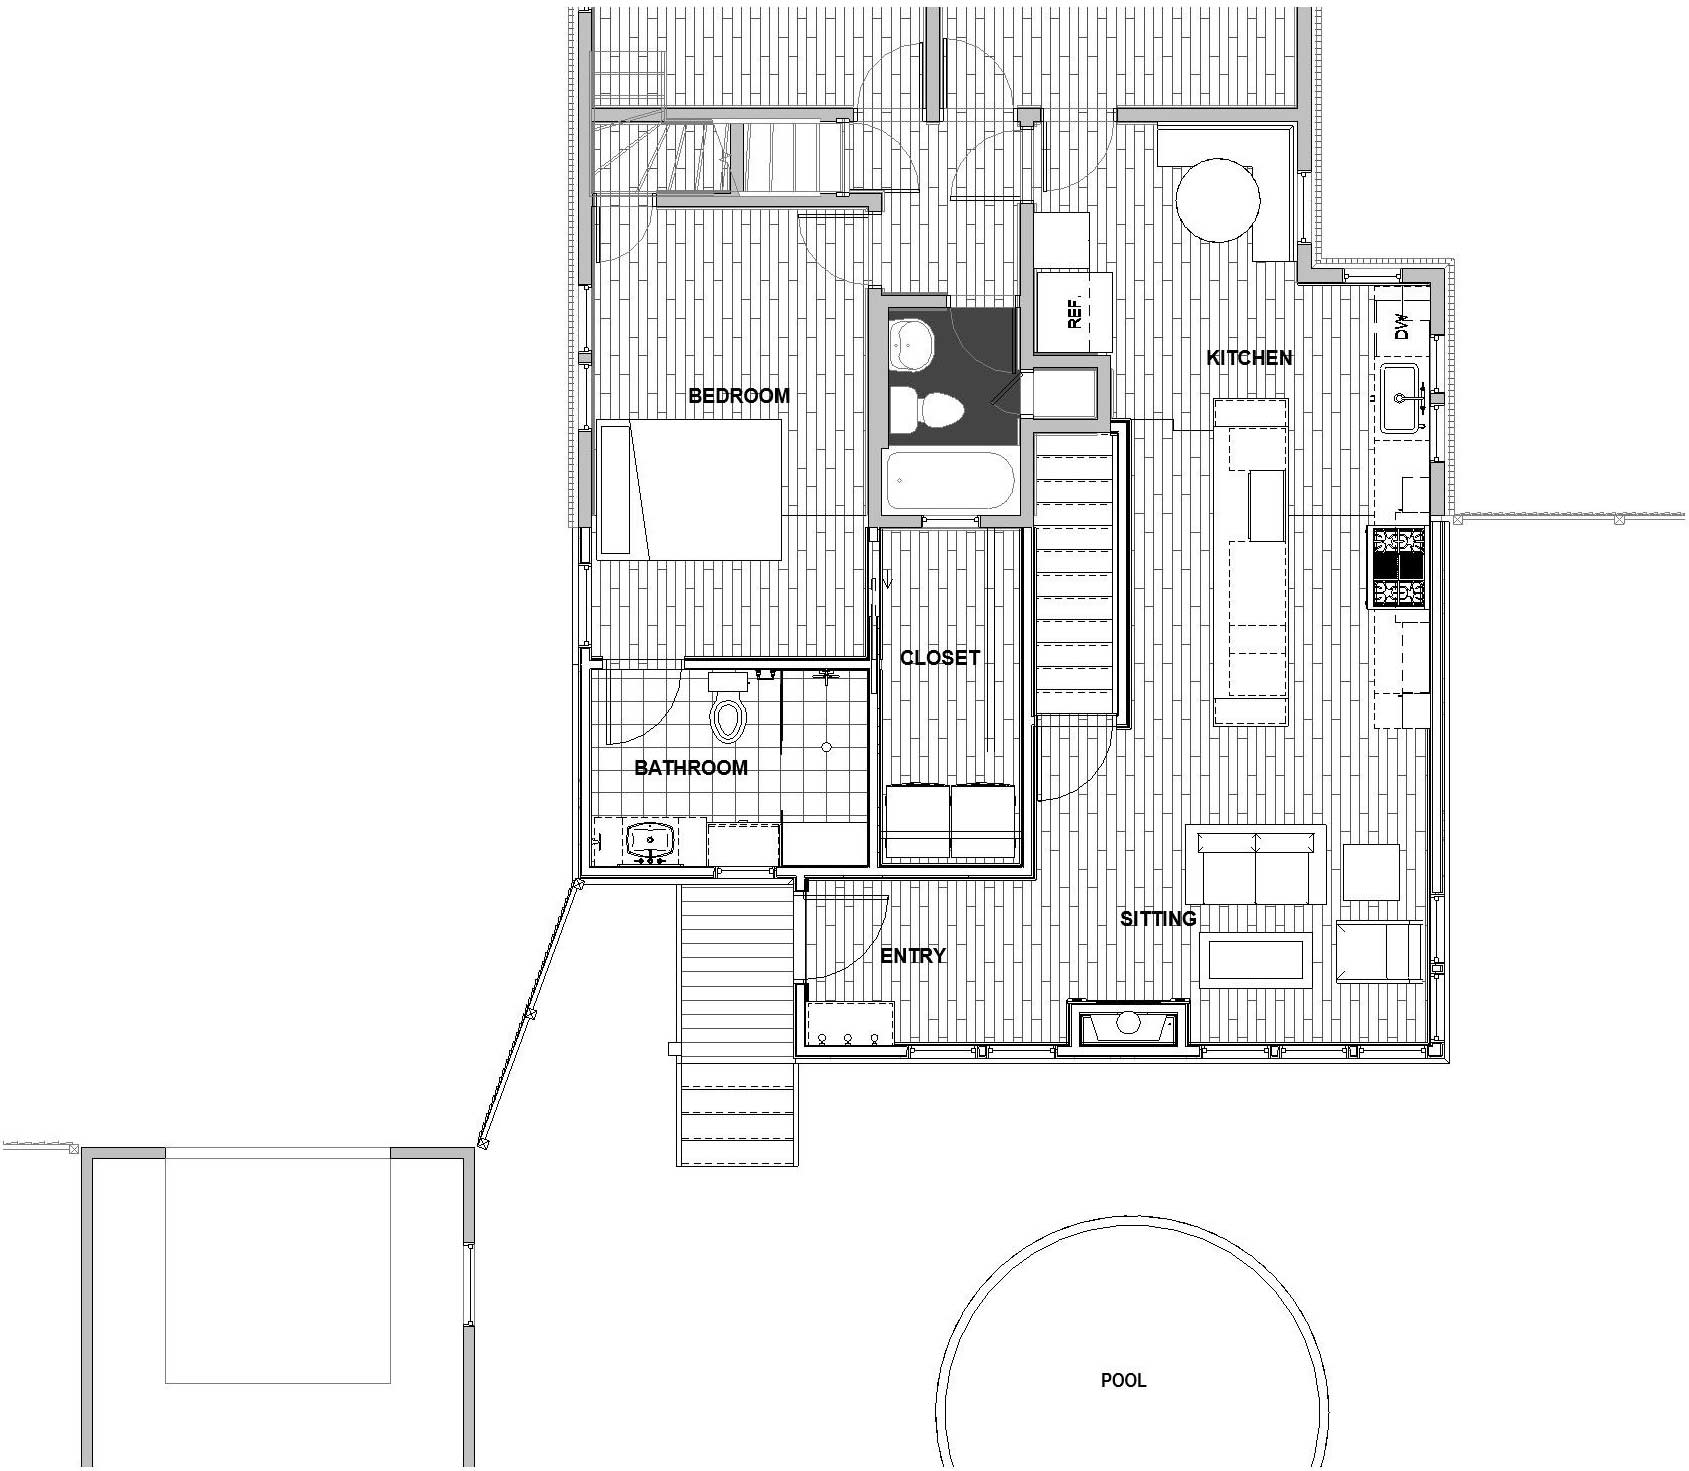 redesign floor plan of 1920s Des Moines Craftsman house being remodeled by Silent Rivers with addition, mudroom, laundry room, new master suite and kitchen